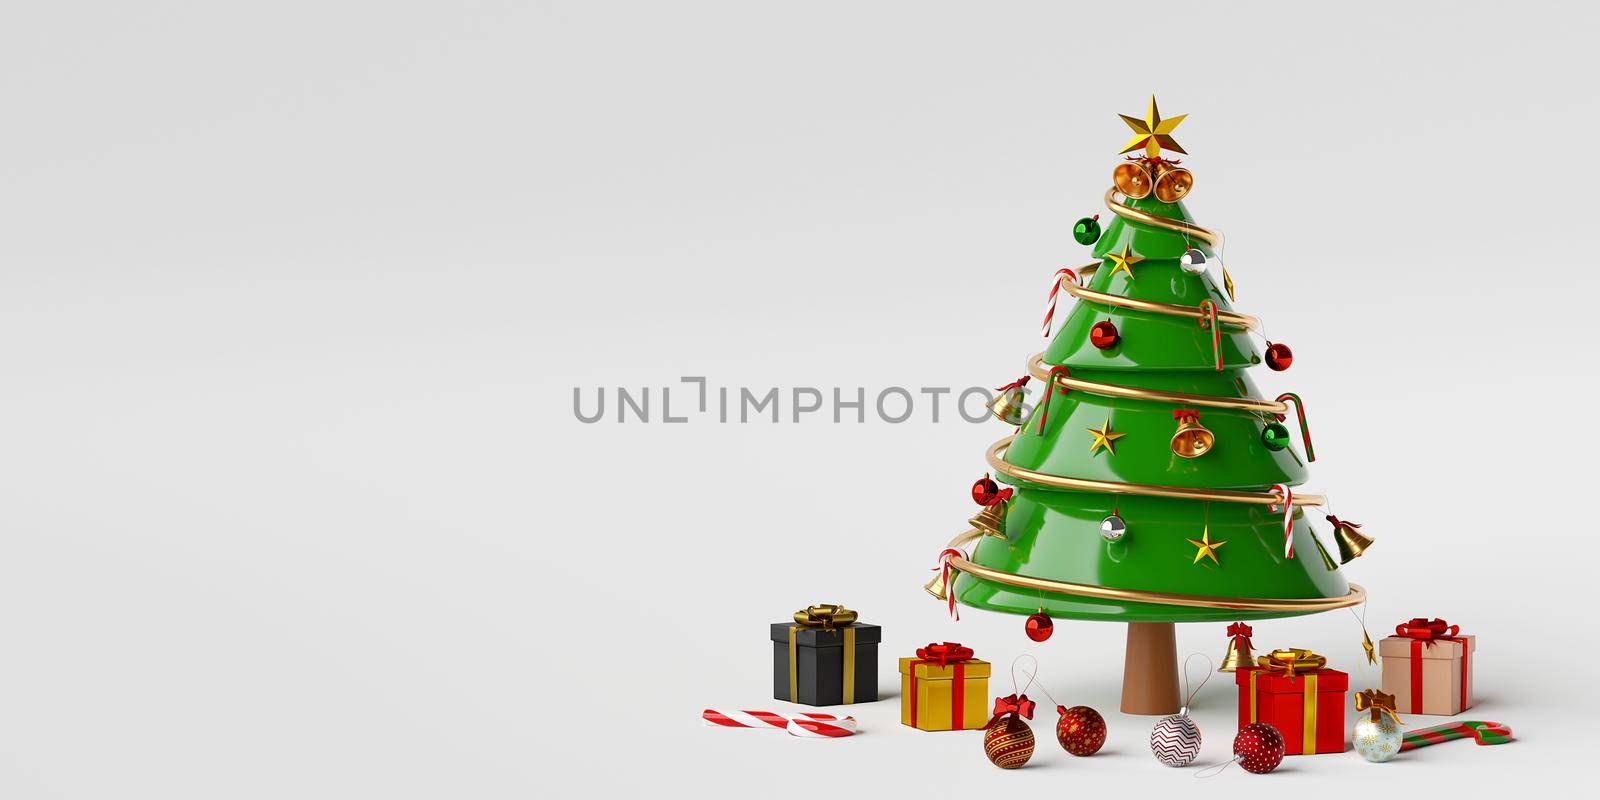 Merry Christmas and Happy New Year, Christmas tree with gifts and Christmas decorations, 3d rendering